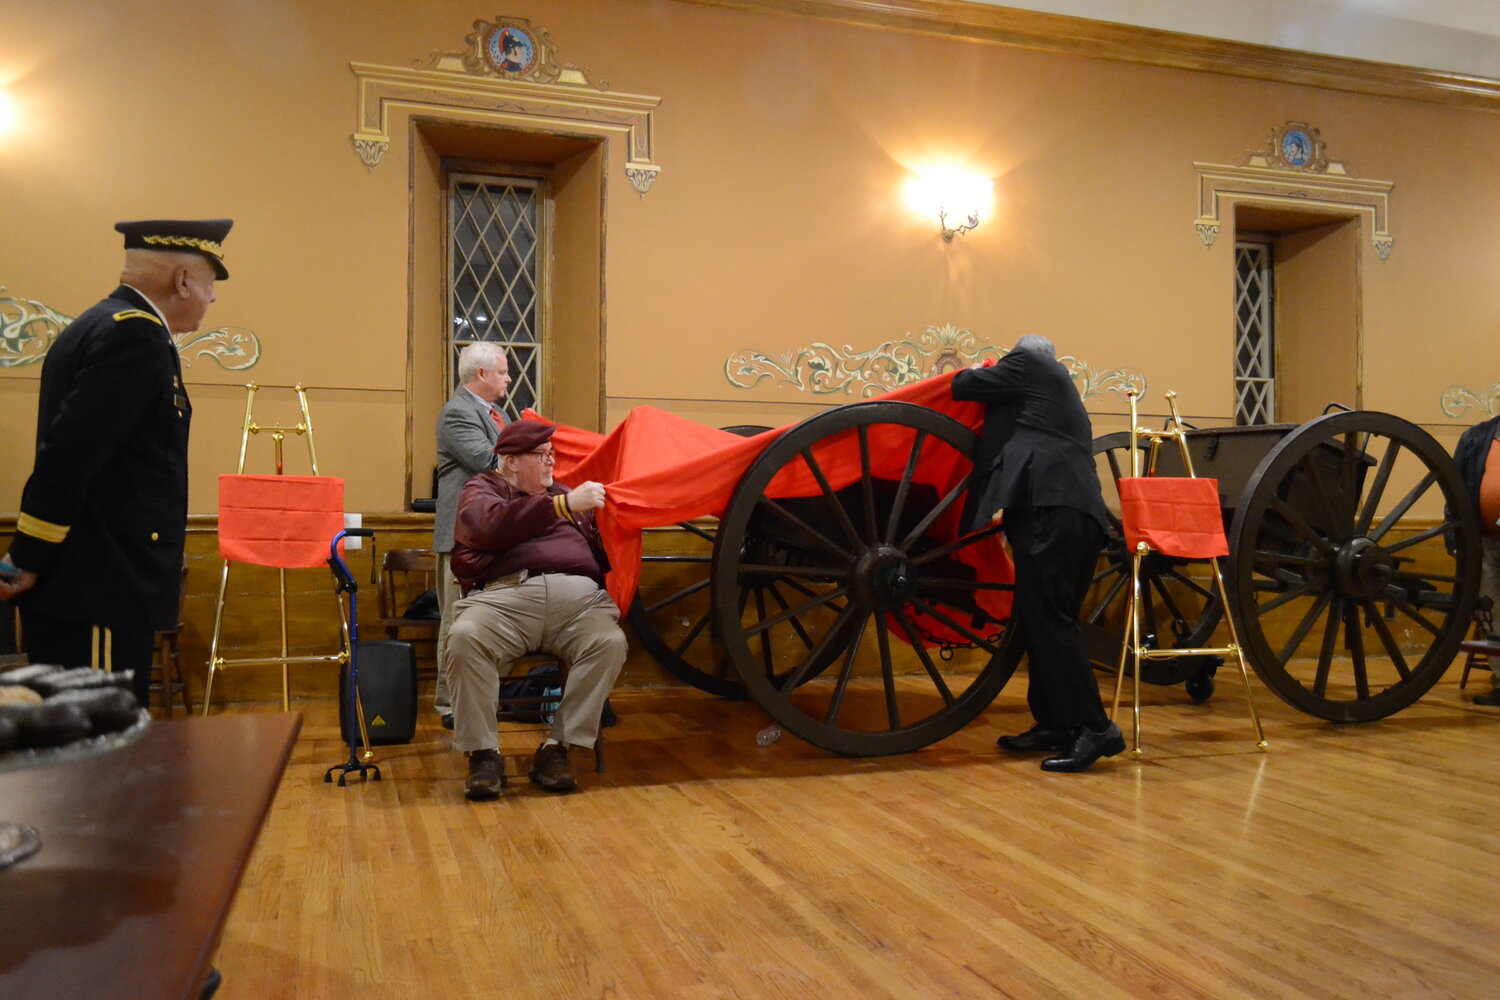 Captain Joseph Giammarco was given a special mention for raising around $36,000 to have this historic 18th century cannon, which used to be displayed outside of Town Hall, re-assembled and restored to its former glory.